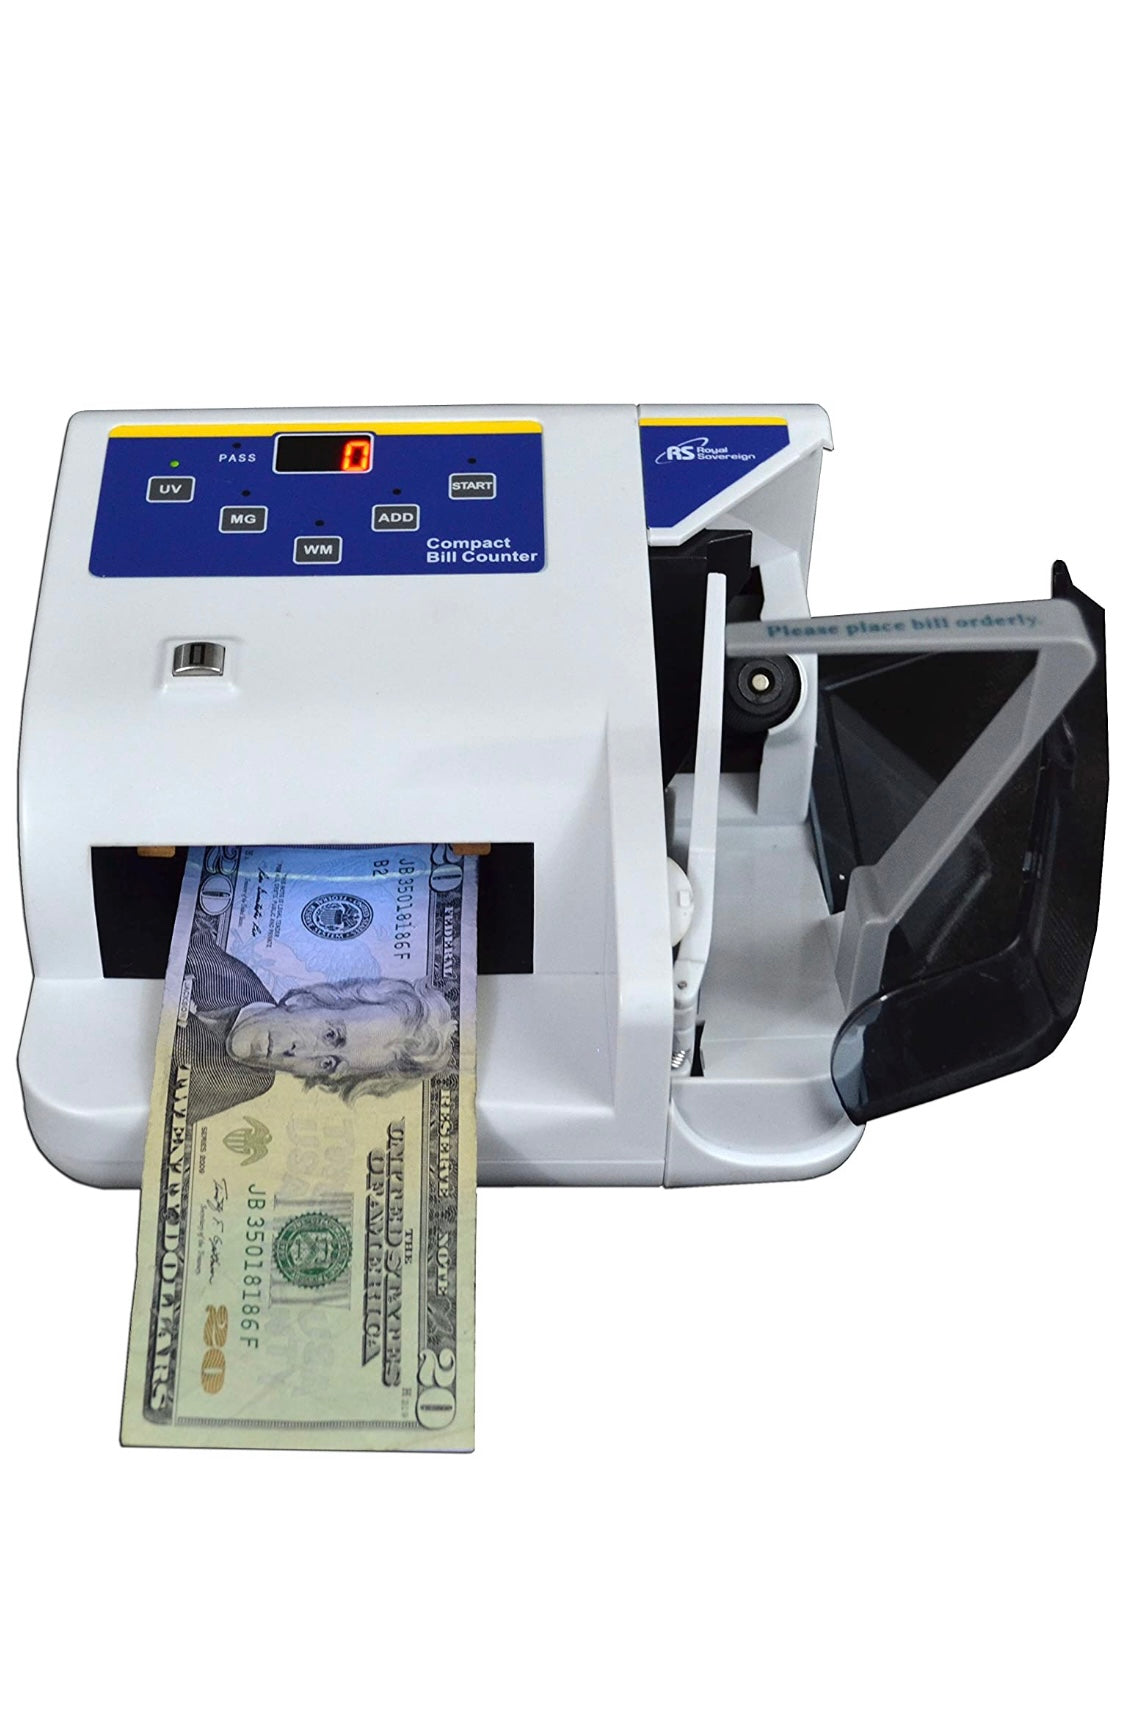 Royal Sovereign Electric Bill Counter with Counterfeit Detection (RBC-Quickcount)